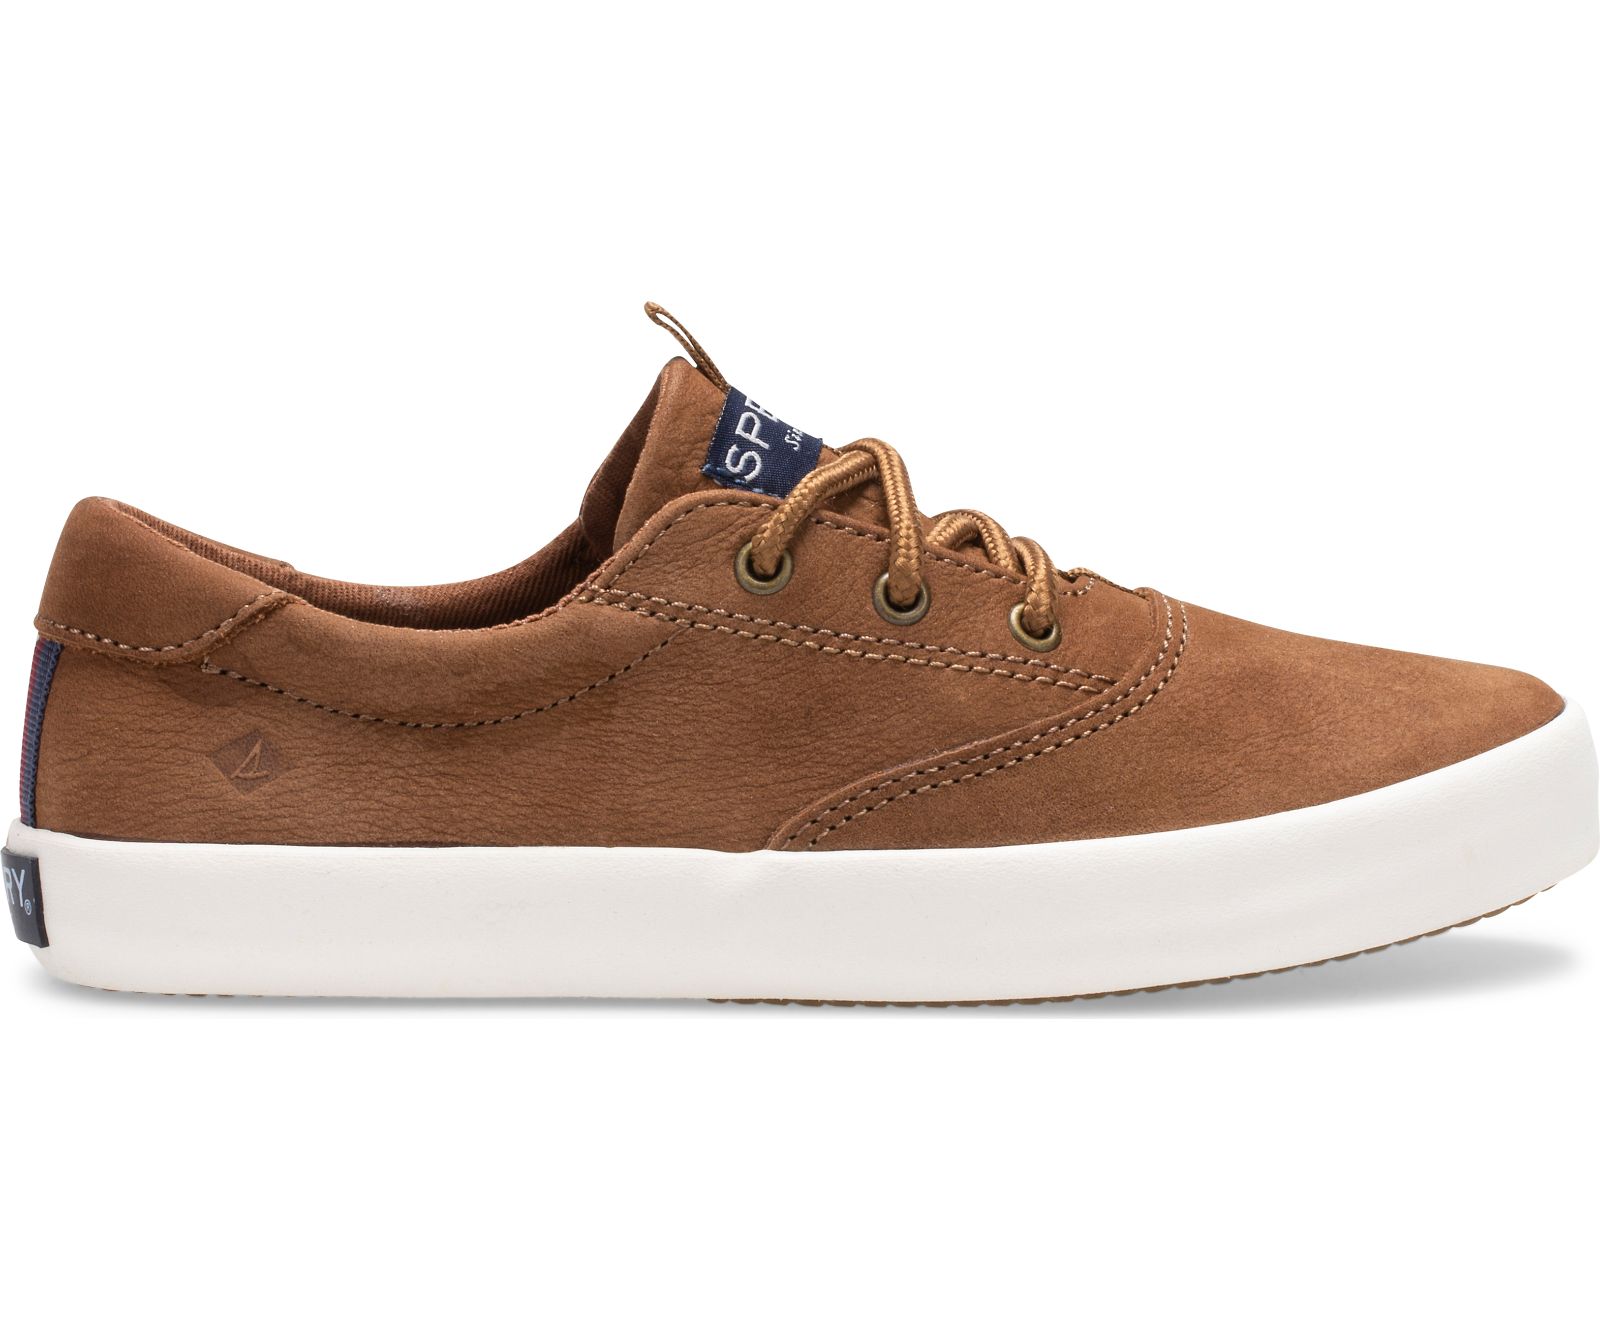 Big Kid's Spinnaker Washable Sneaker - Tan - Click Image to Close